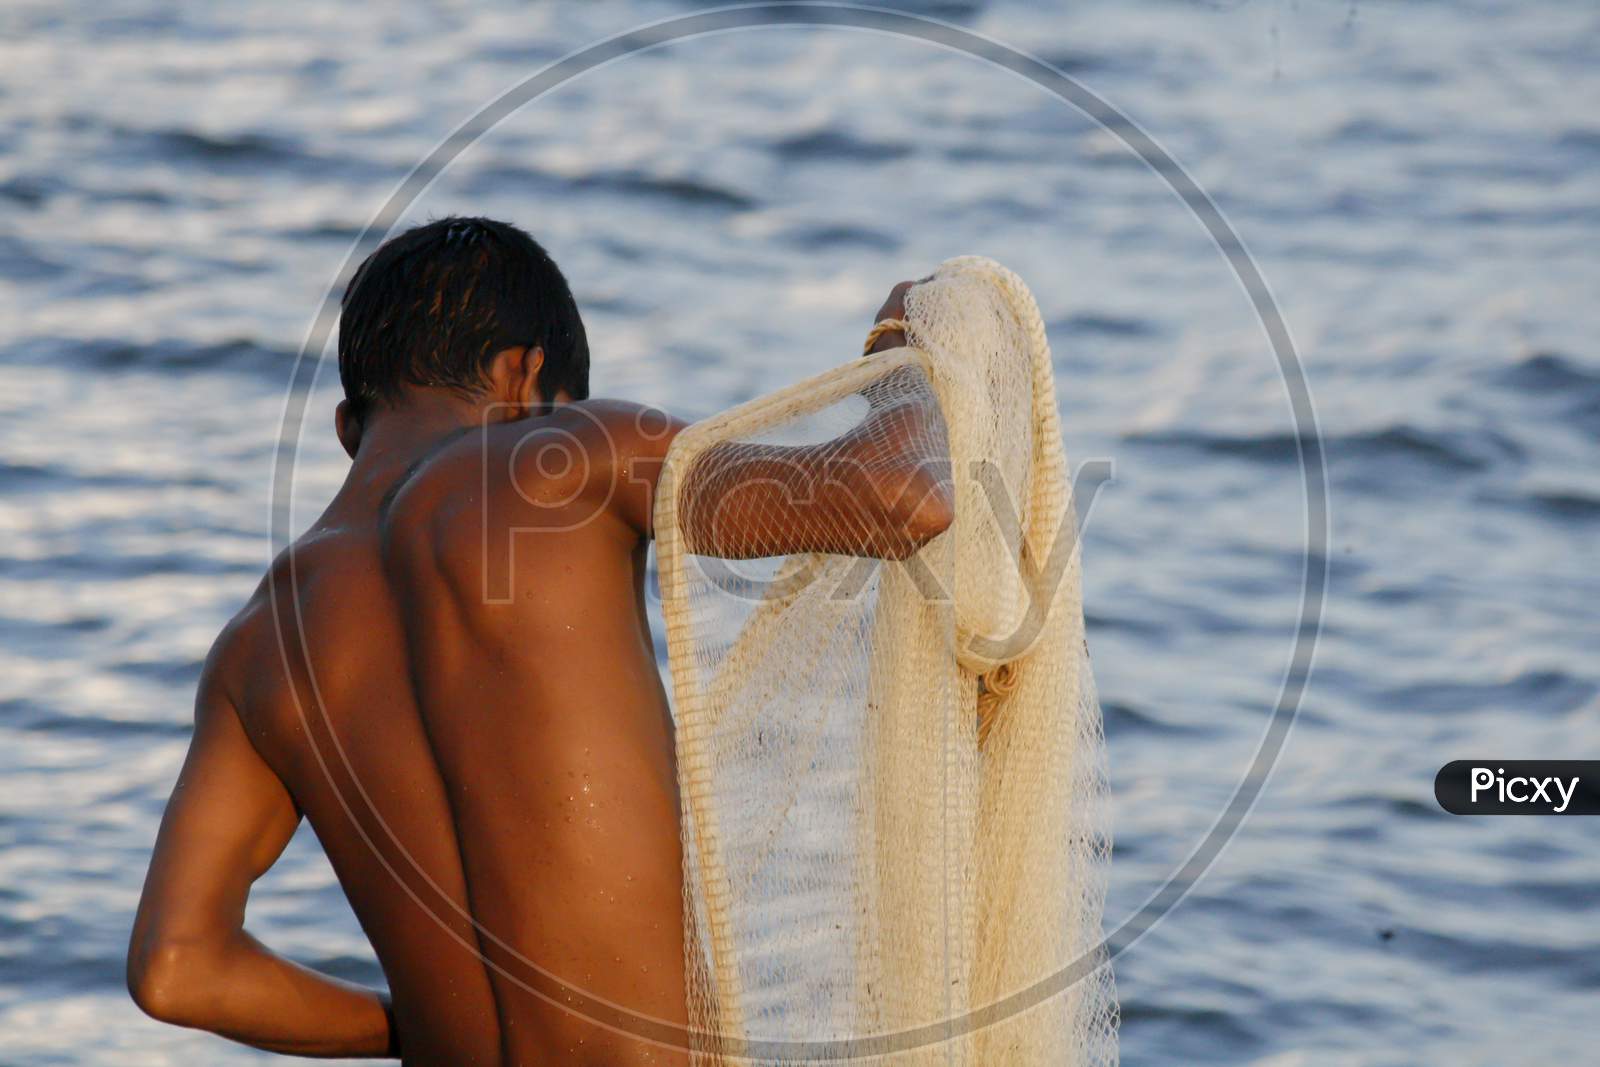 Image of A fisherman preparing his fishing net to catch fish on